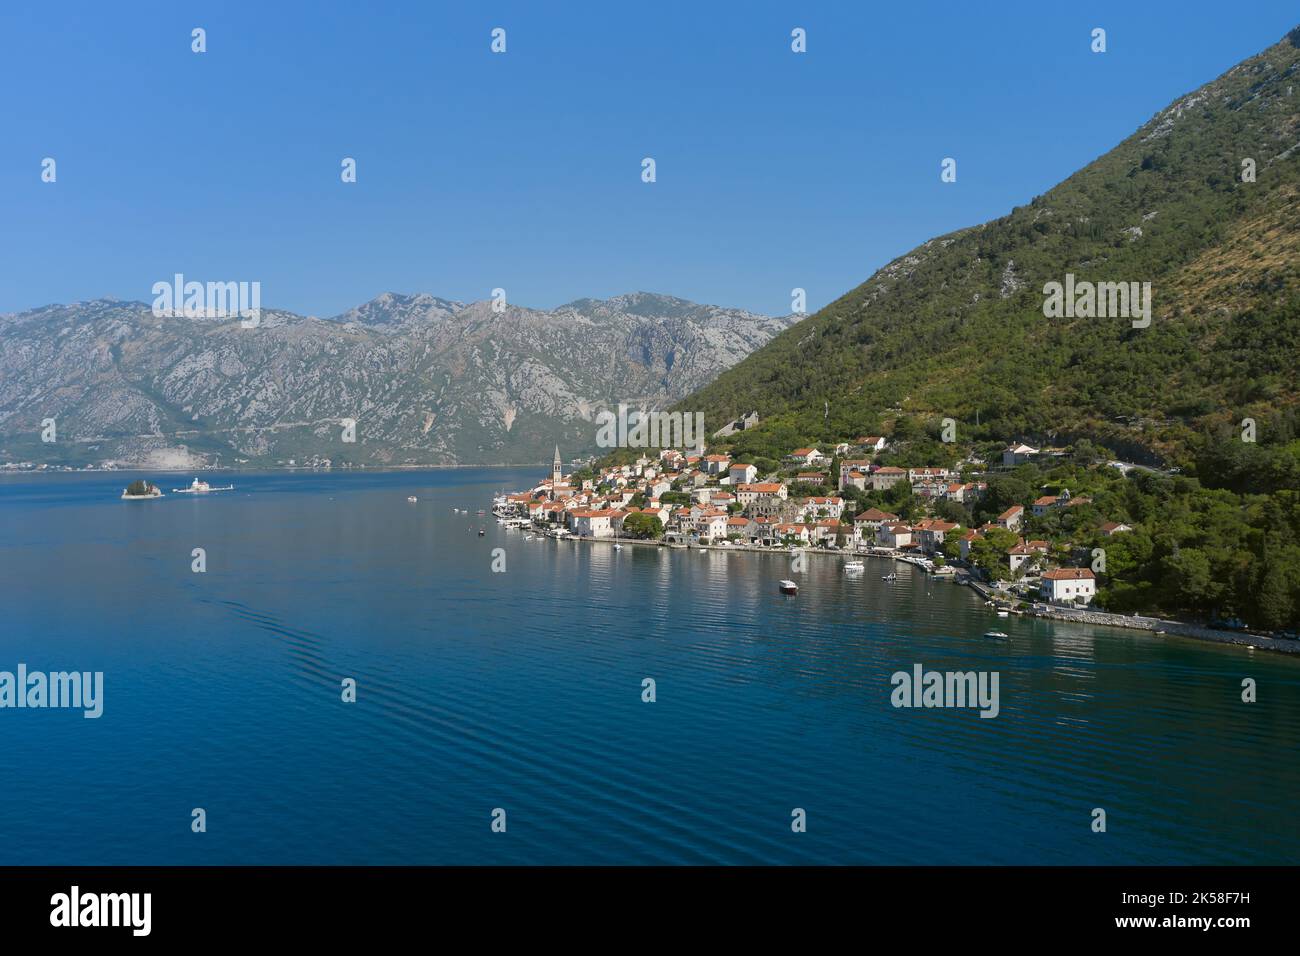 Aerial view of coastal town of Perast in Montenegro, seascape with small town. Stock Photo